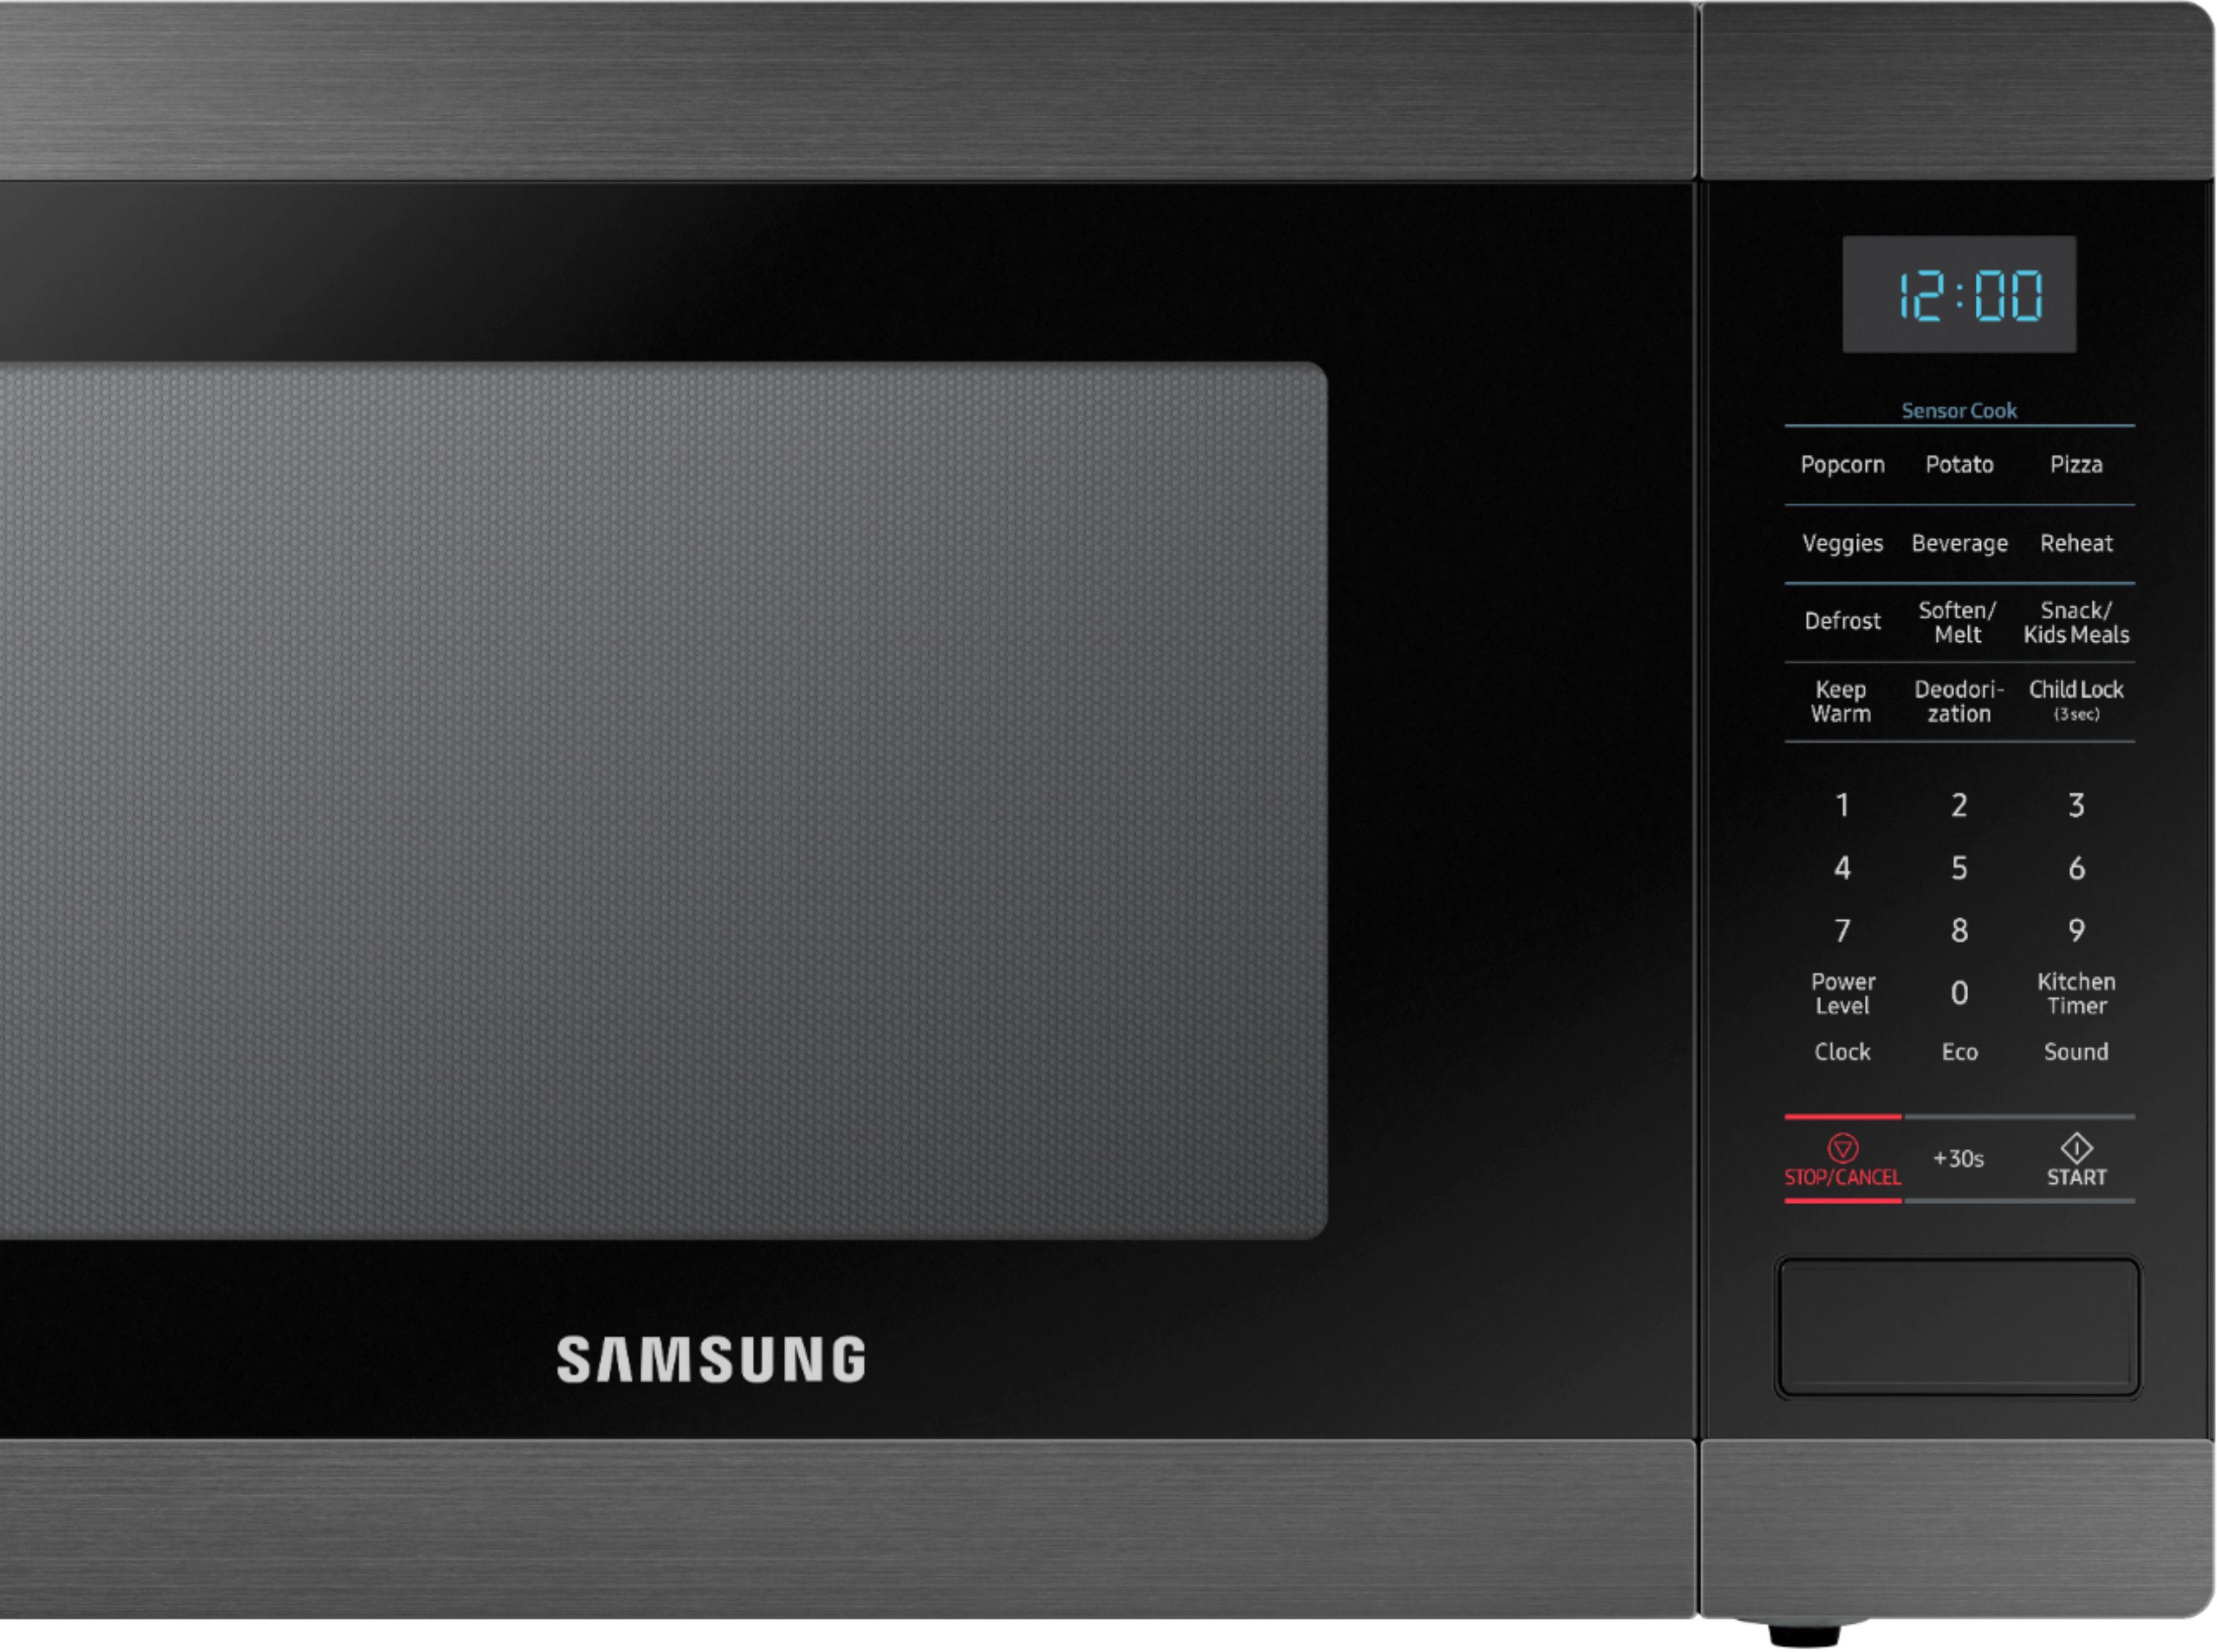 Samsung 1.9 Cu. Ft. Countertop Microwave for Built-In Applications with  Sensor Cook Black Stainless Steel MS19M8020TG - Best Buy